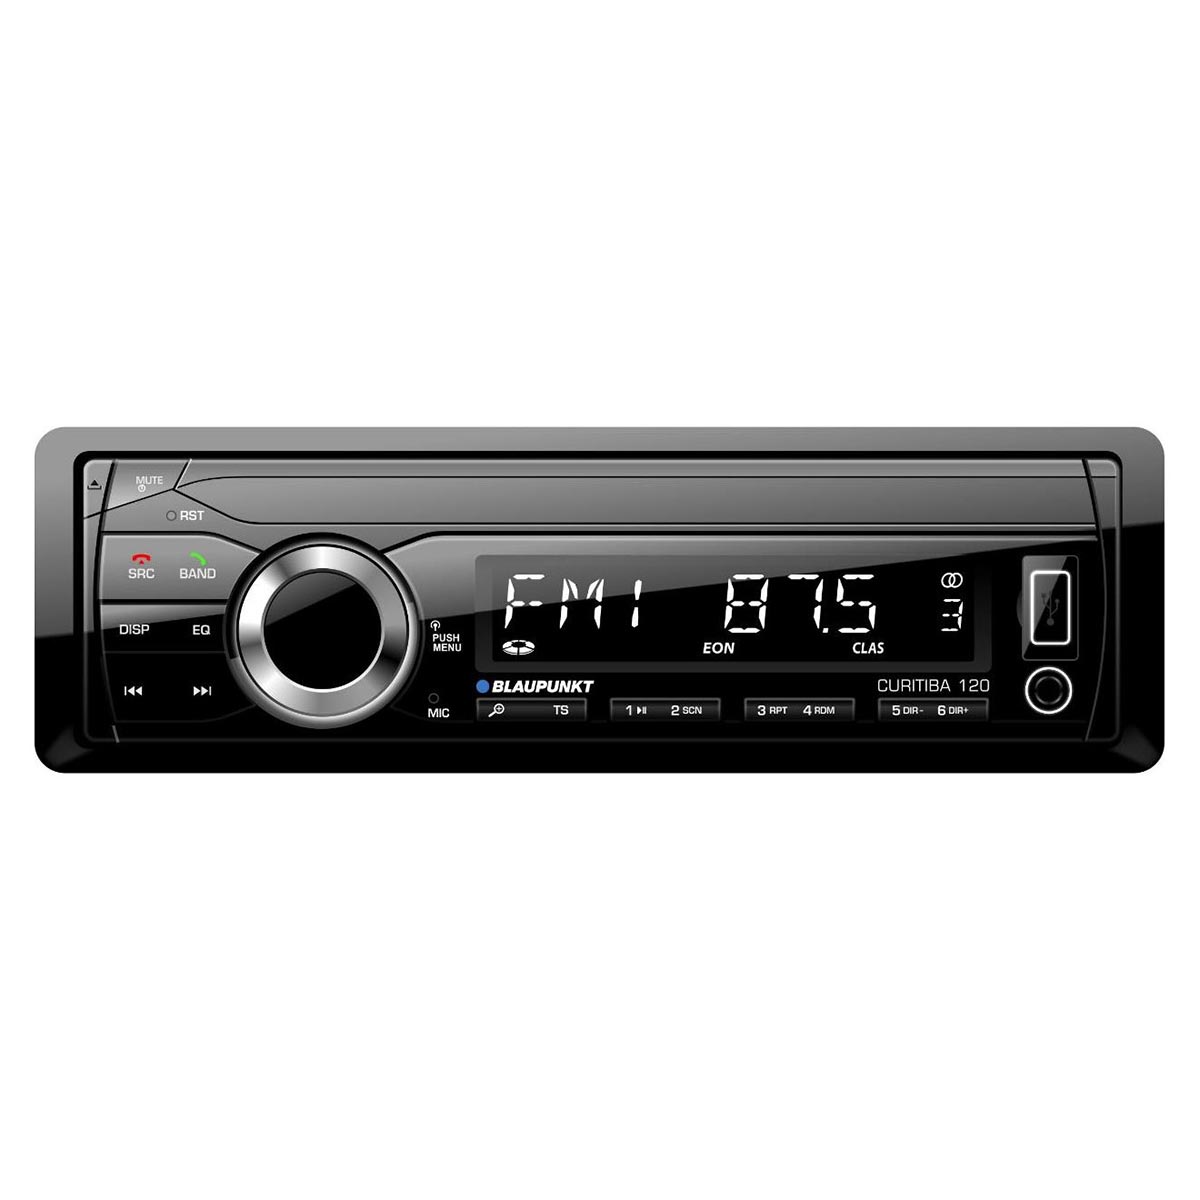 Picture of Blaupunkt CURITIBA120 Detachable Face Mechless AM-FM Receiver with Bluetooth & USB Input